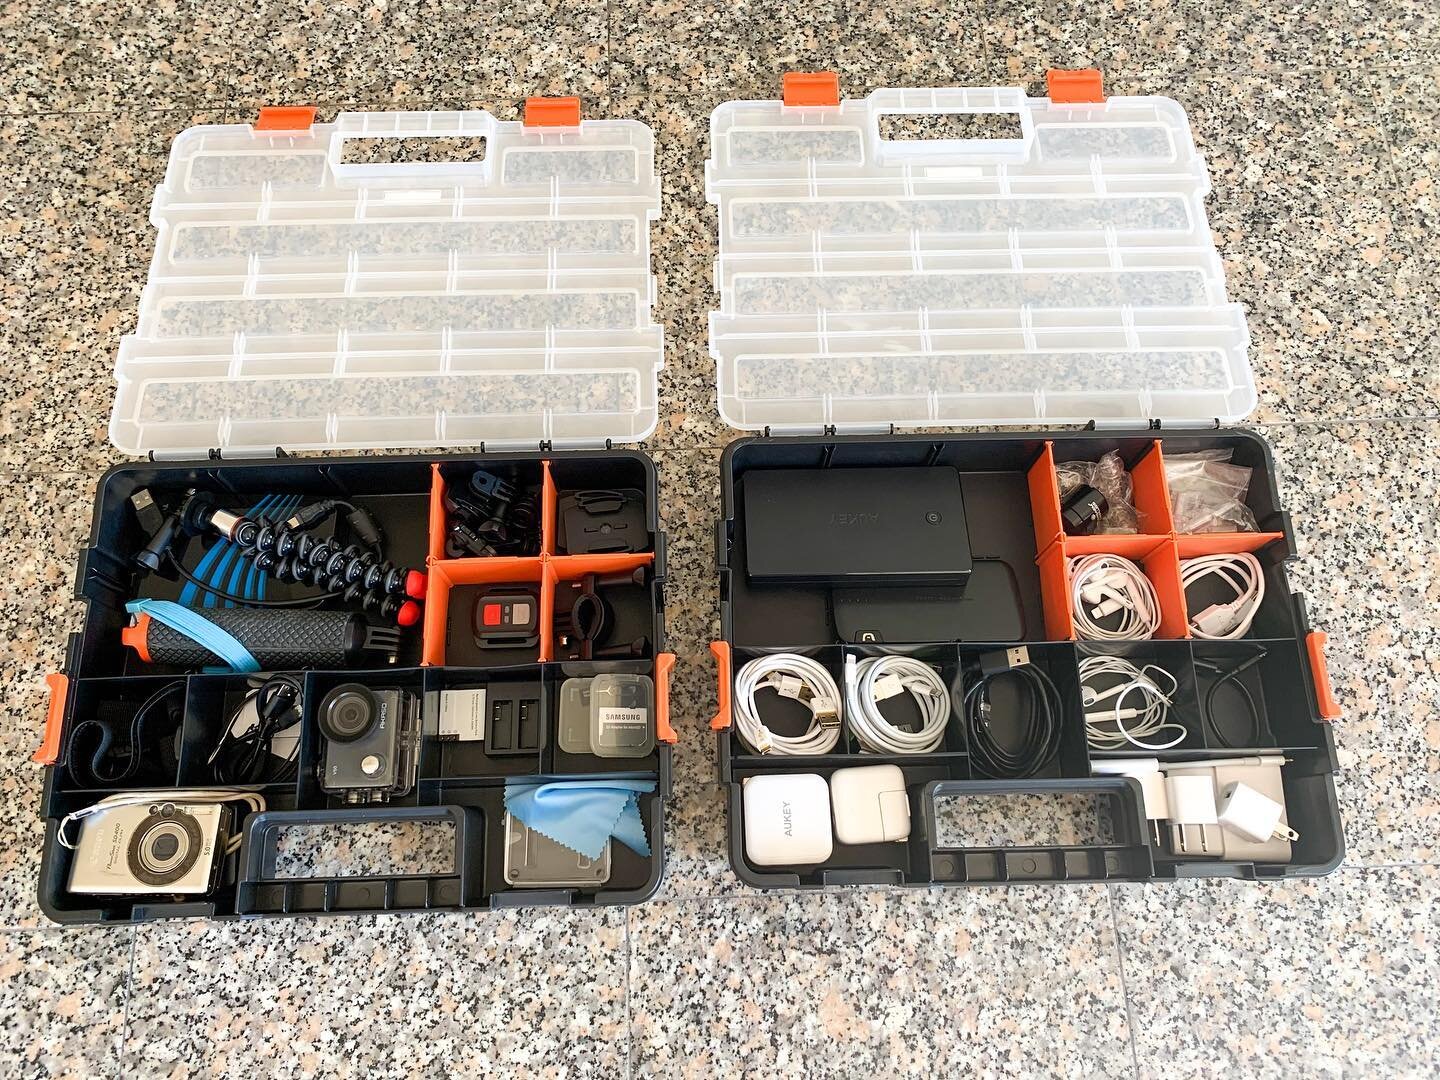 Electronics and camera organization: The local Home Depot sells tool/screw organizers that stack and have adjustable compartments. Skip the Container Store when you just need functionality because your hardware or big box store will have something so